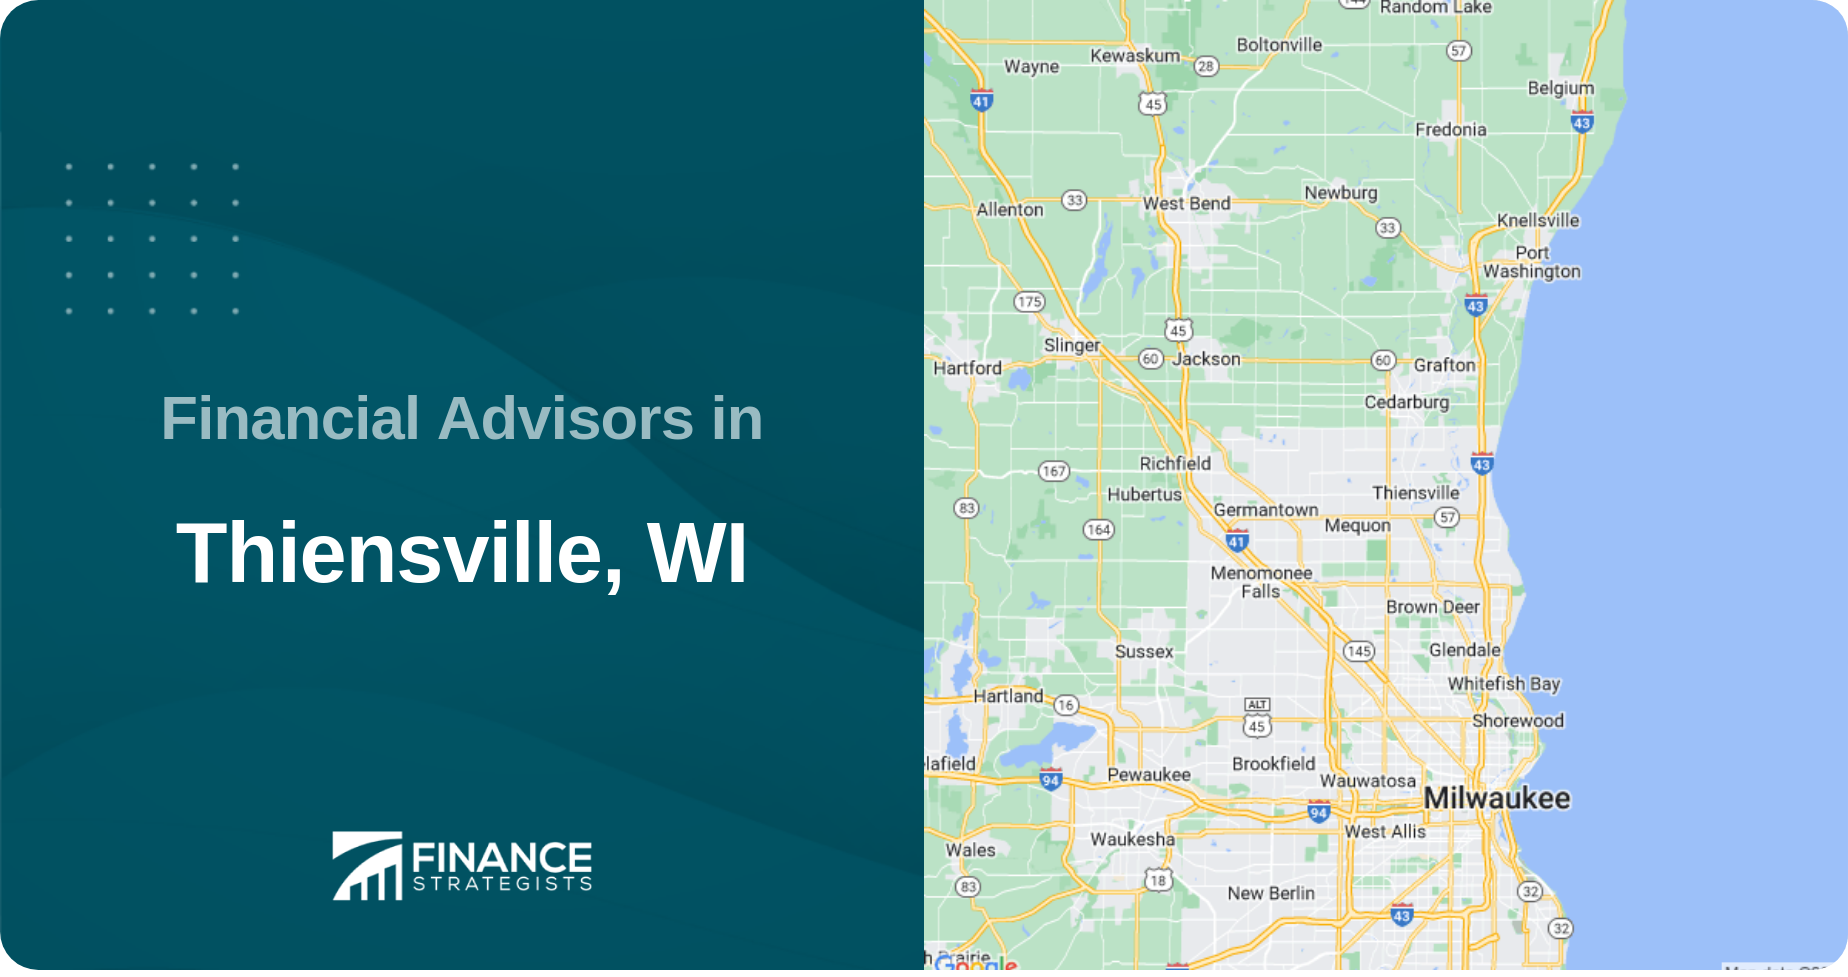 Financial Advisors in Thiensville, WI